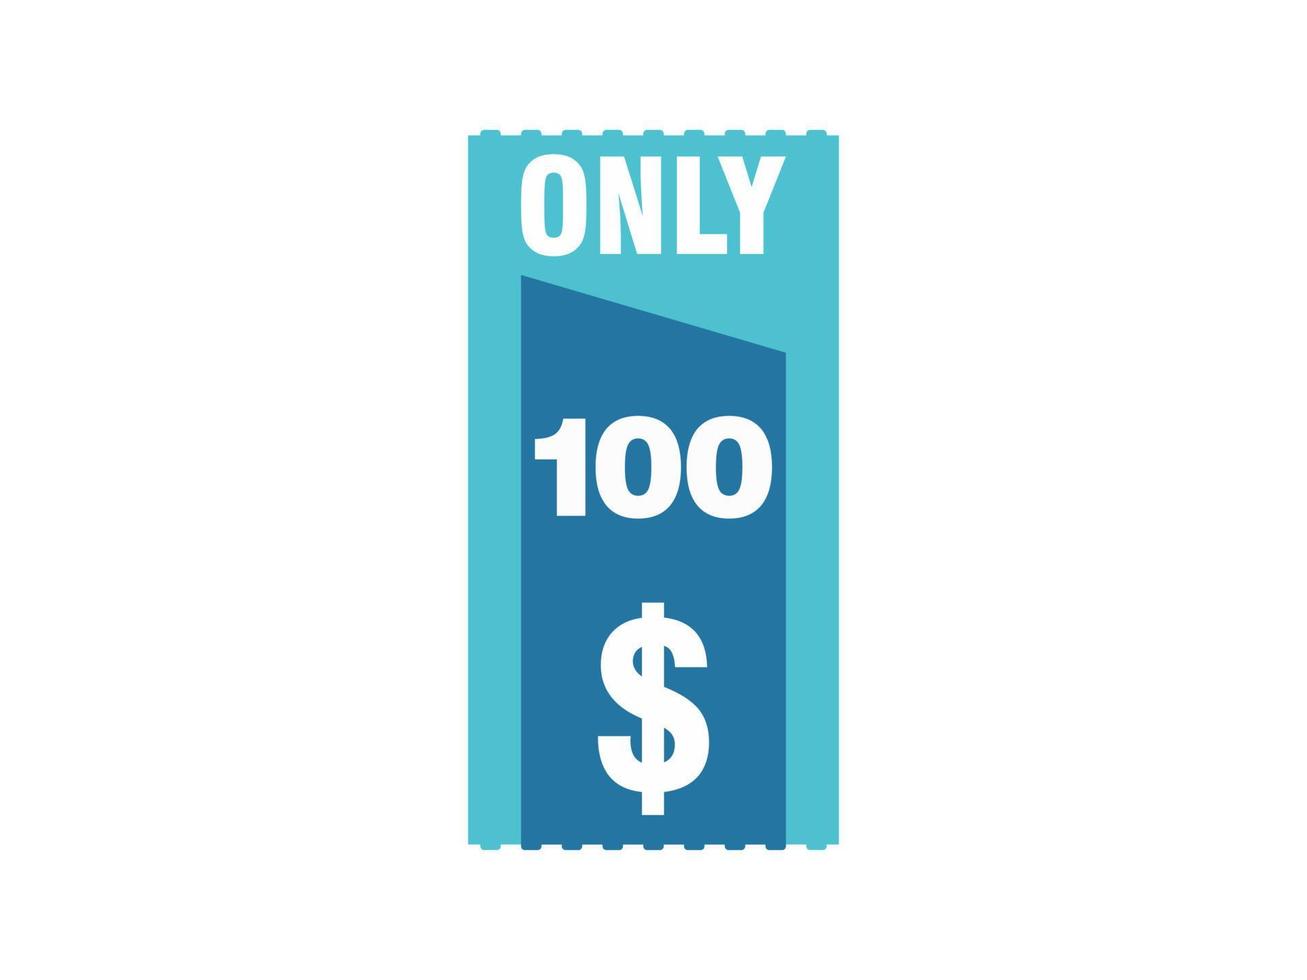 100 Dollar Only Coupon sign or Label or discount voucher Money Saving label, with coupon vector illustration summer offer ends weekend holiday